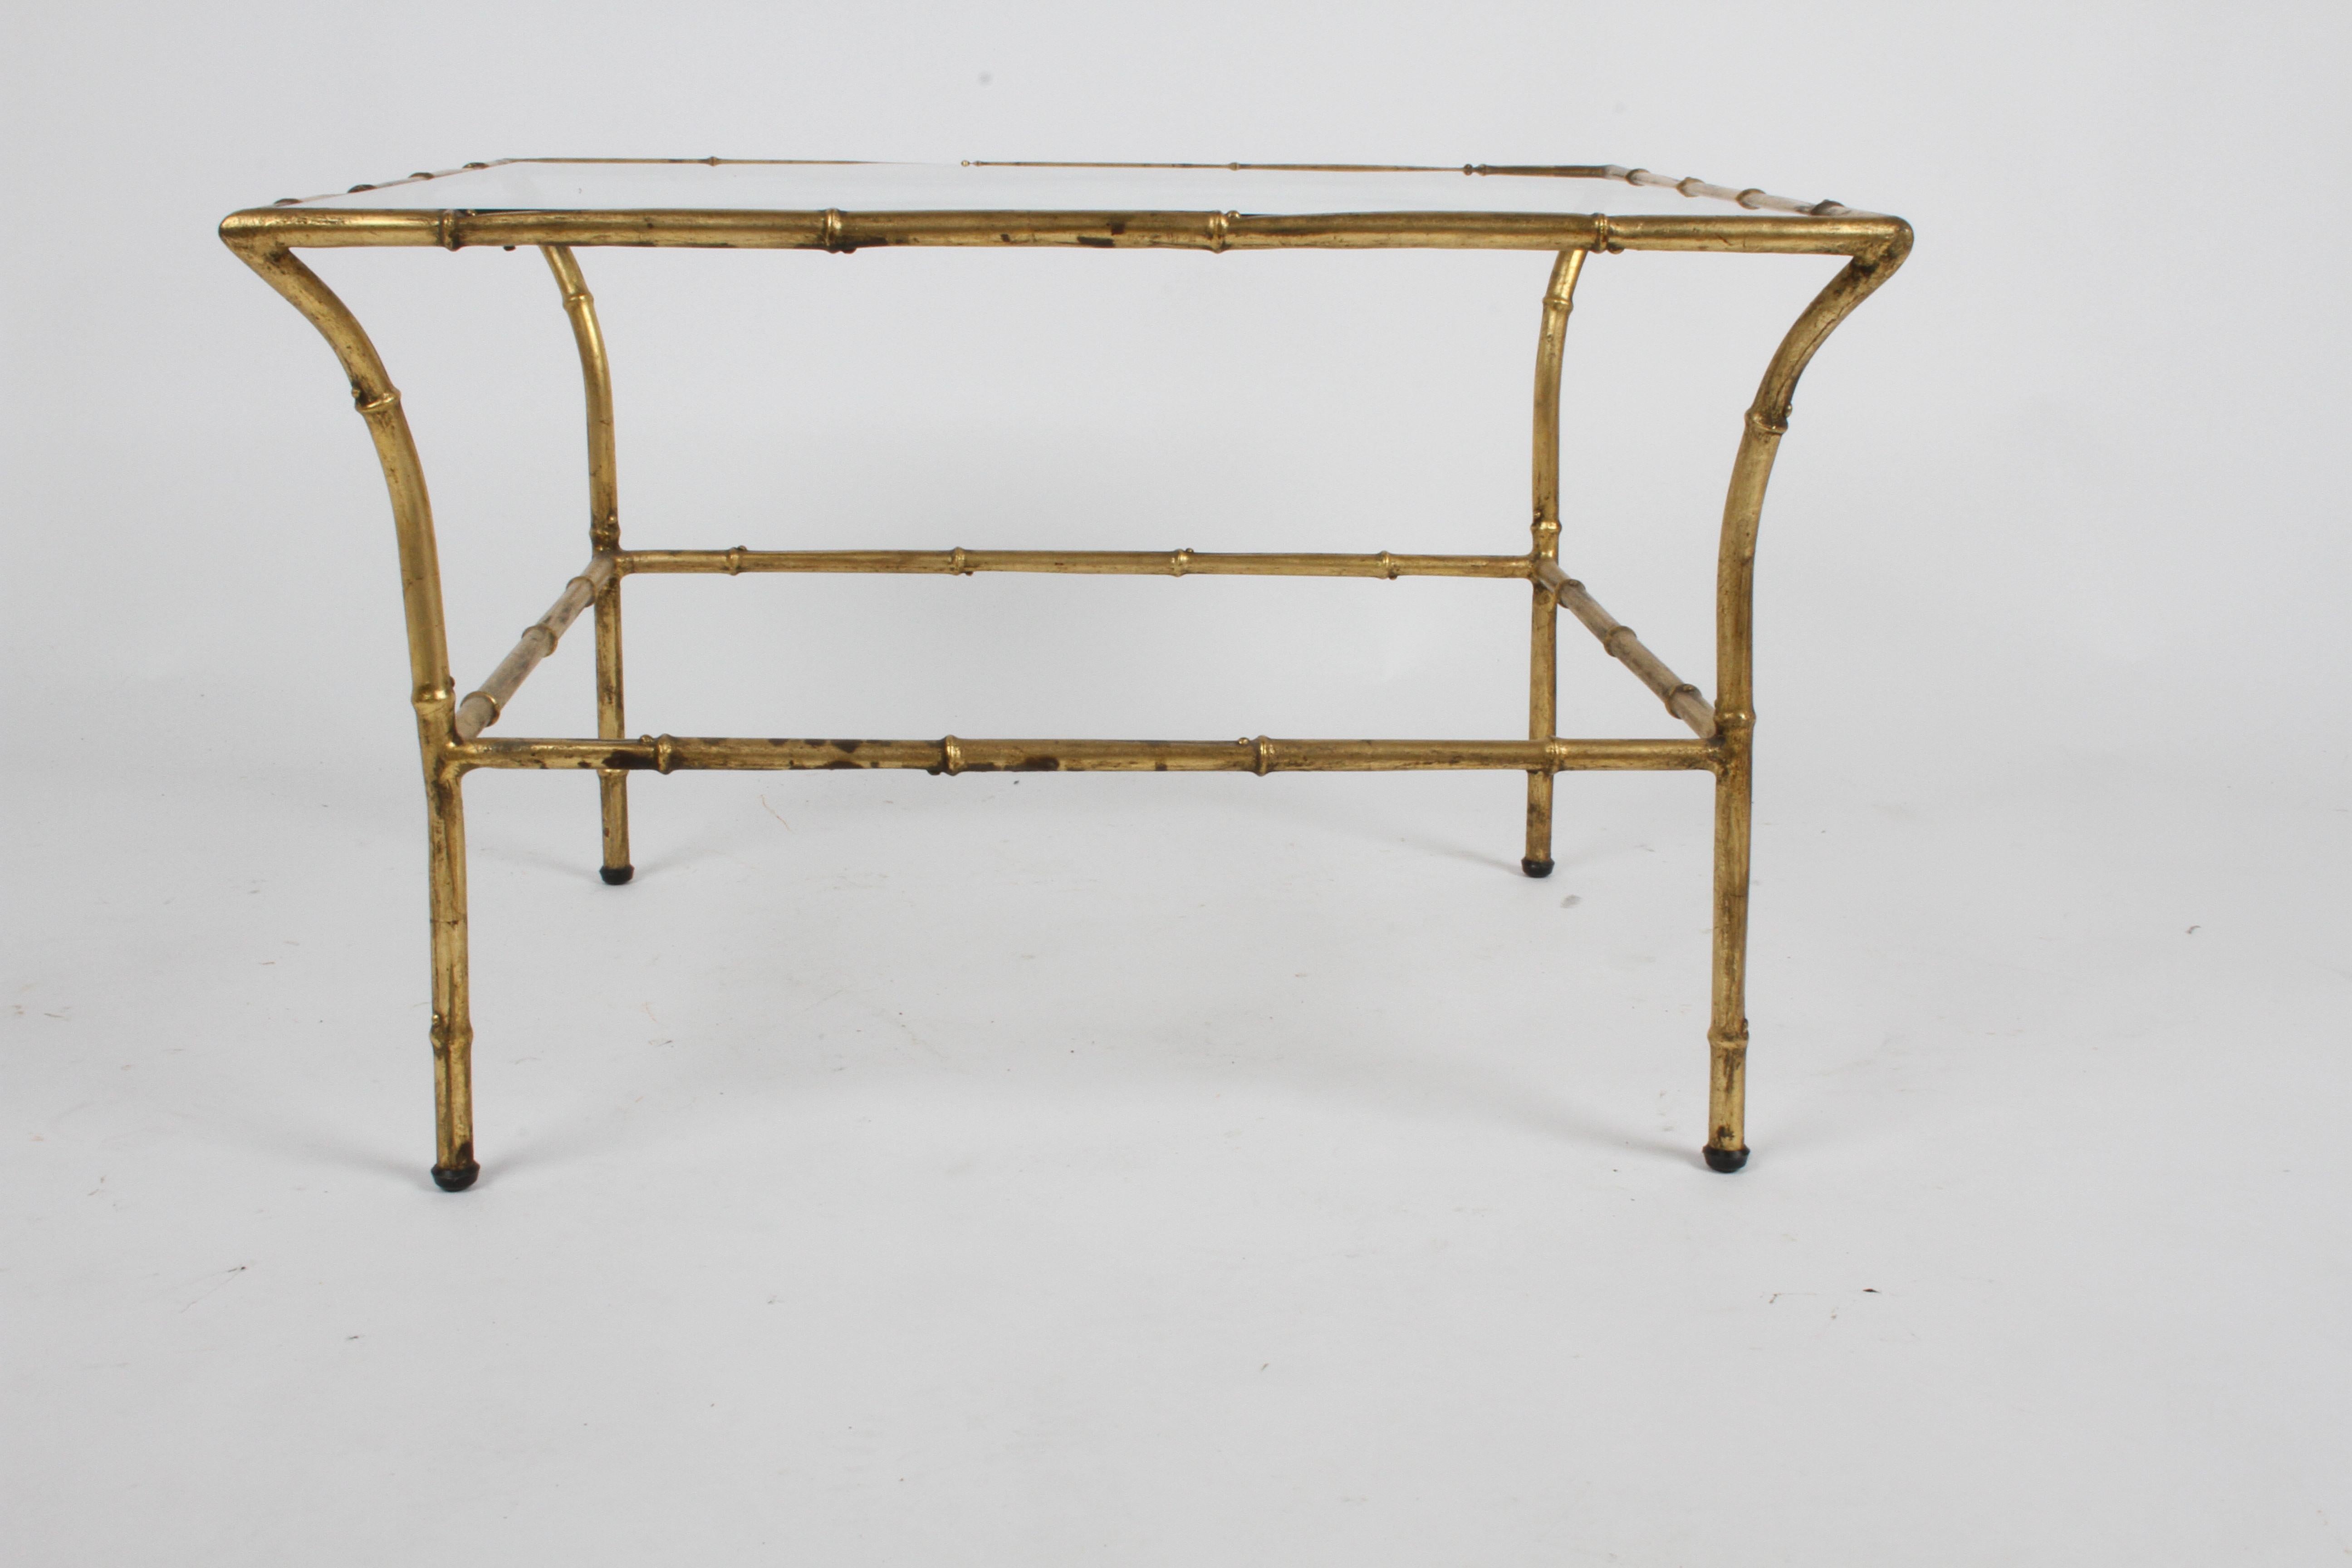 Nice mid-century square gold gilt faux bamboo glass top side, end table or small coffee table made in Italy. Small chip to glass as seen in photo, overall very nice.